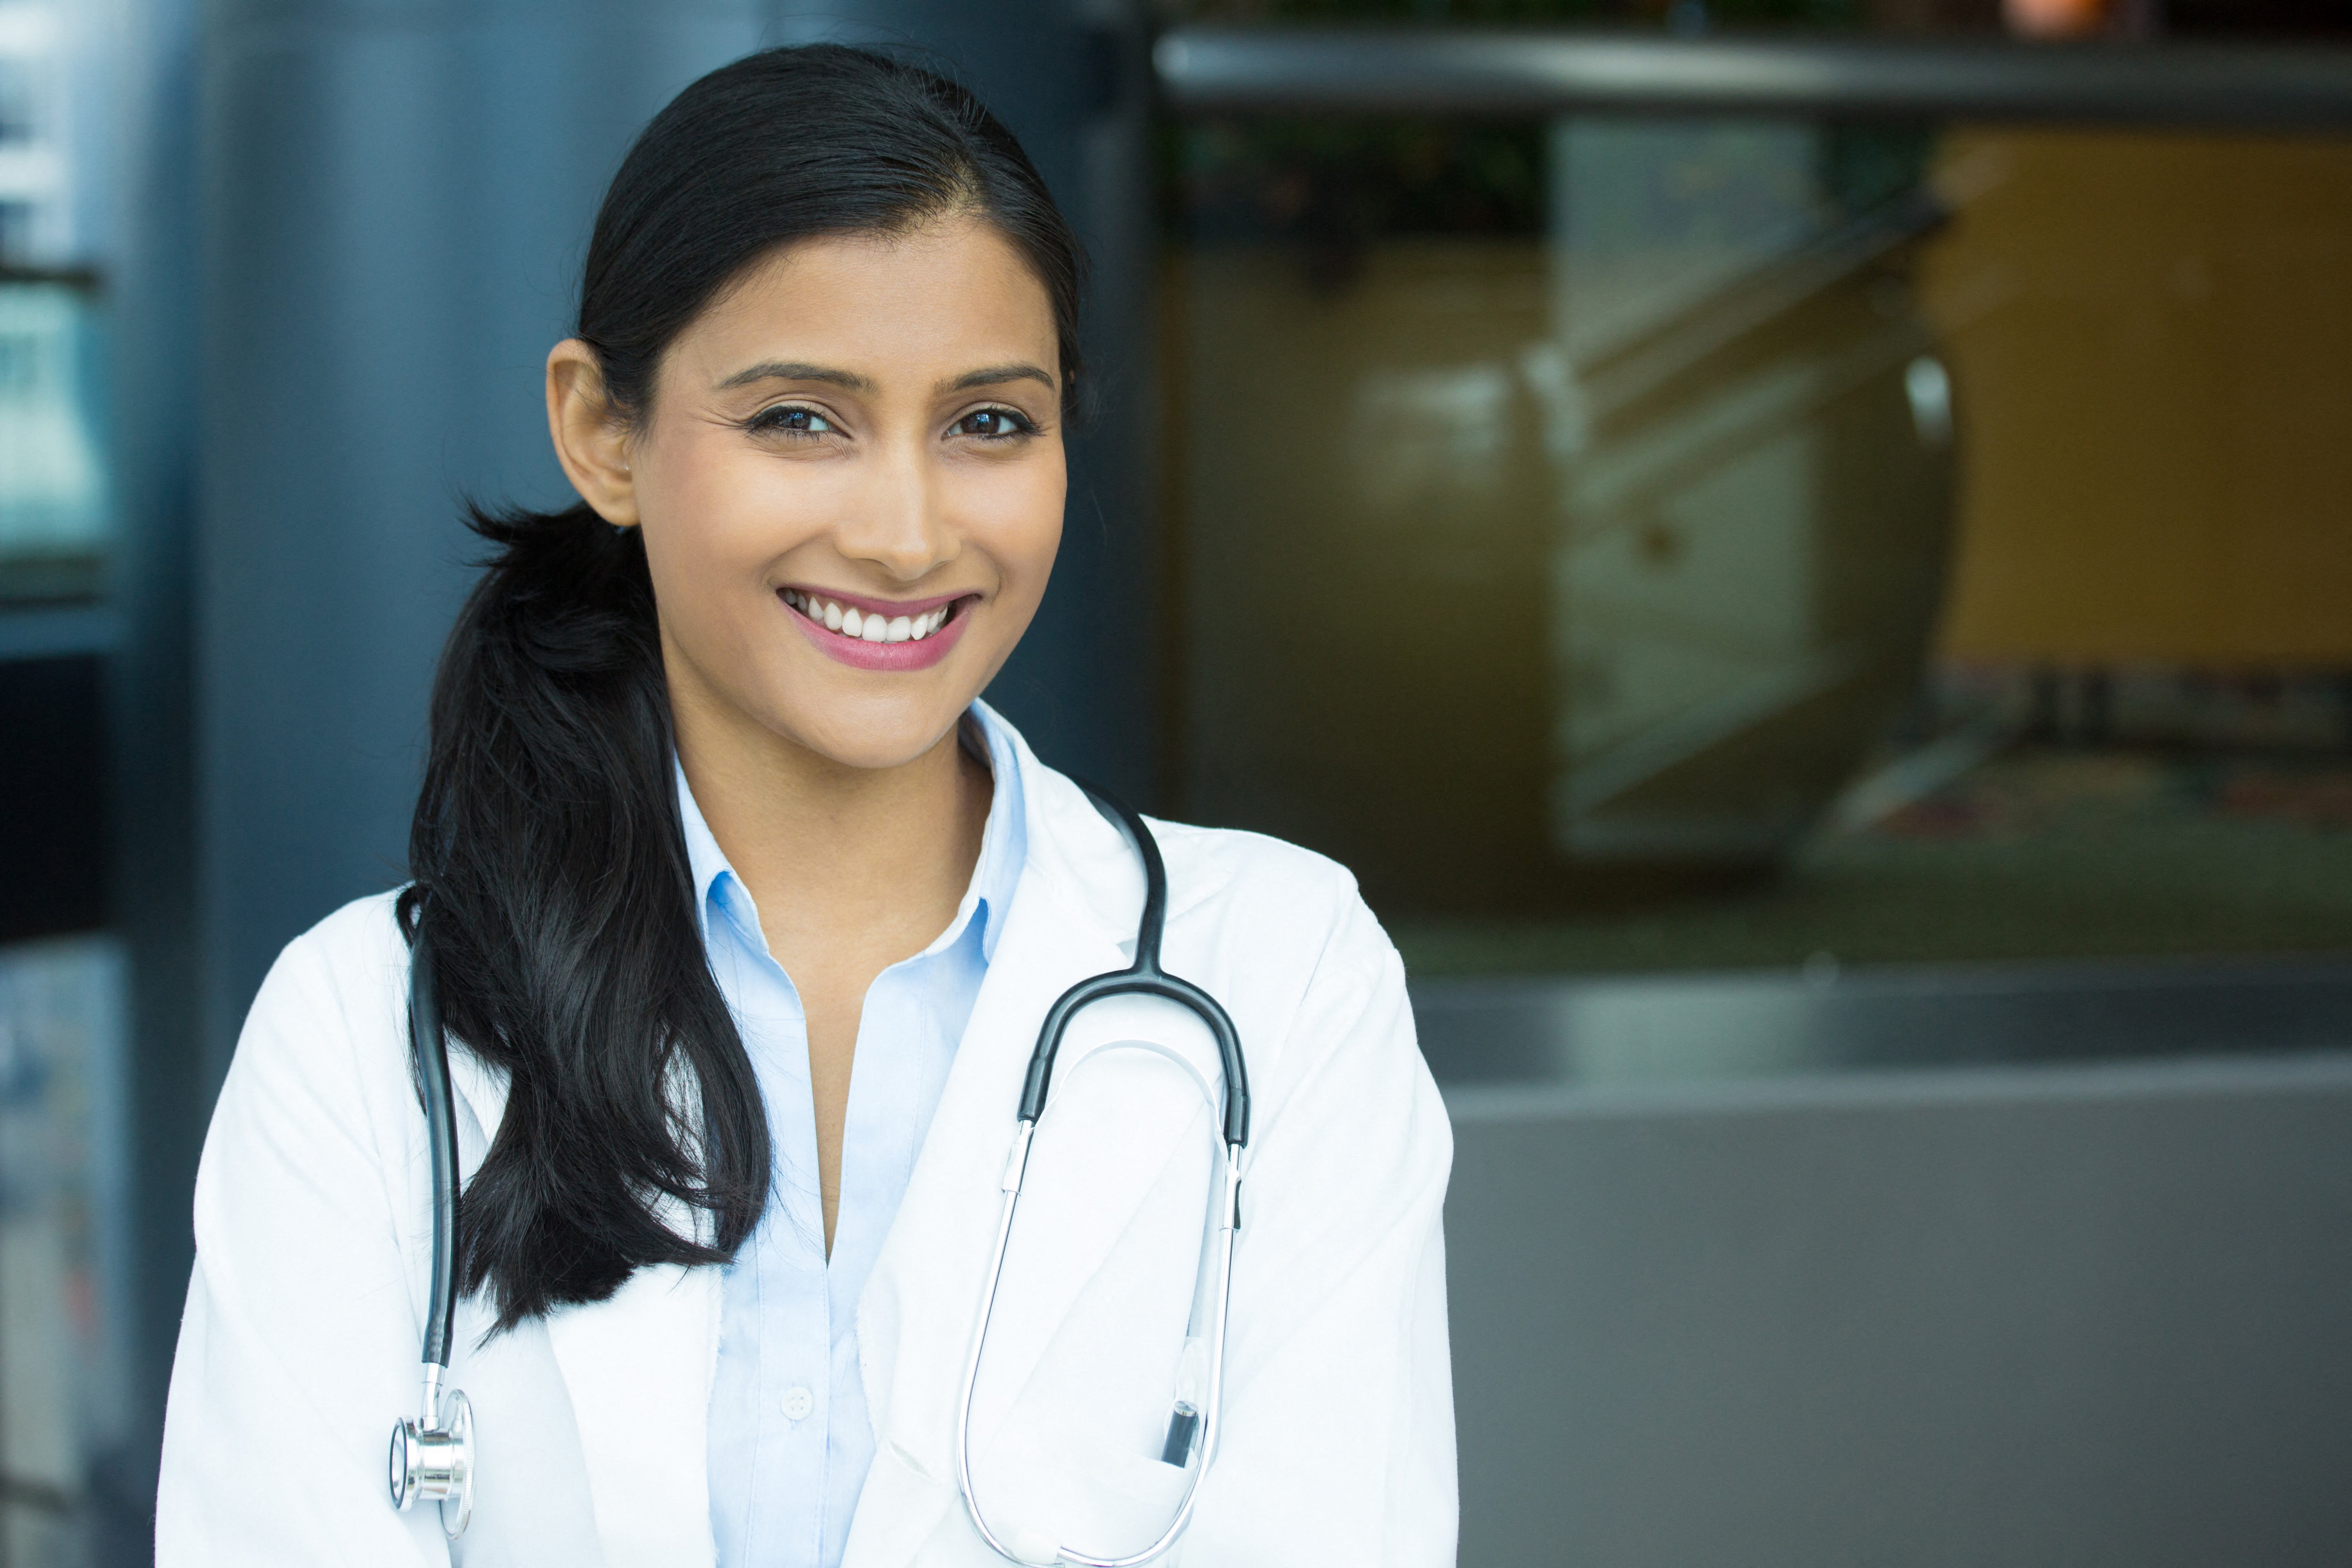 Woman doctor wearing a white coat smiling